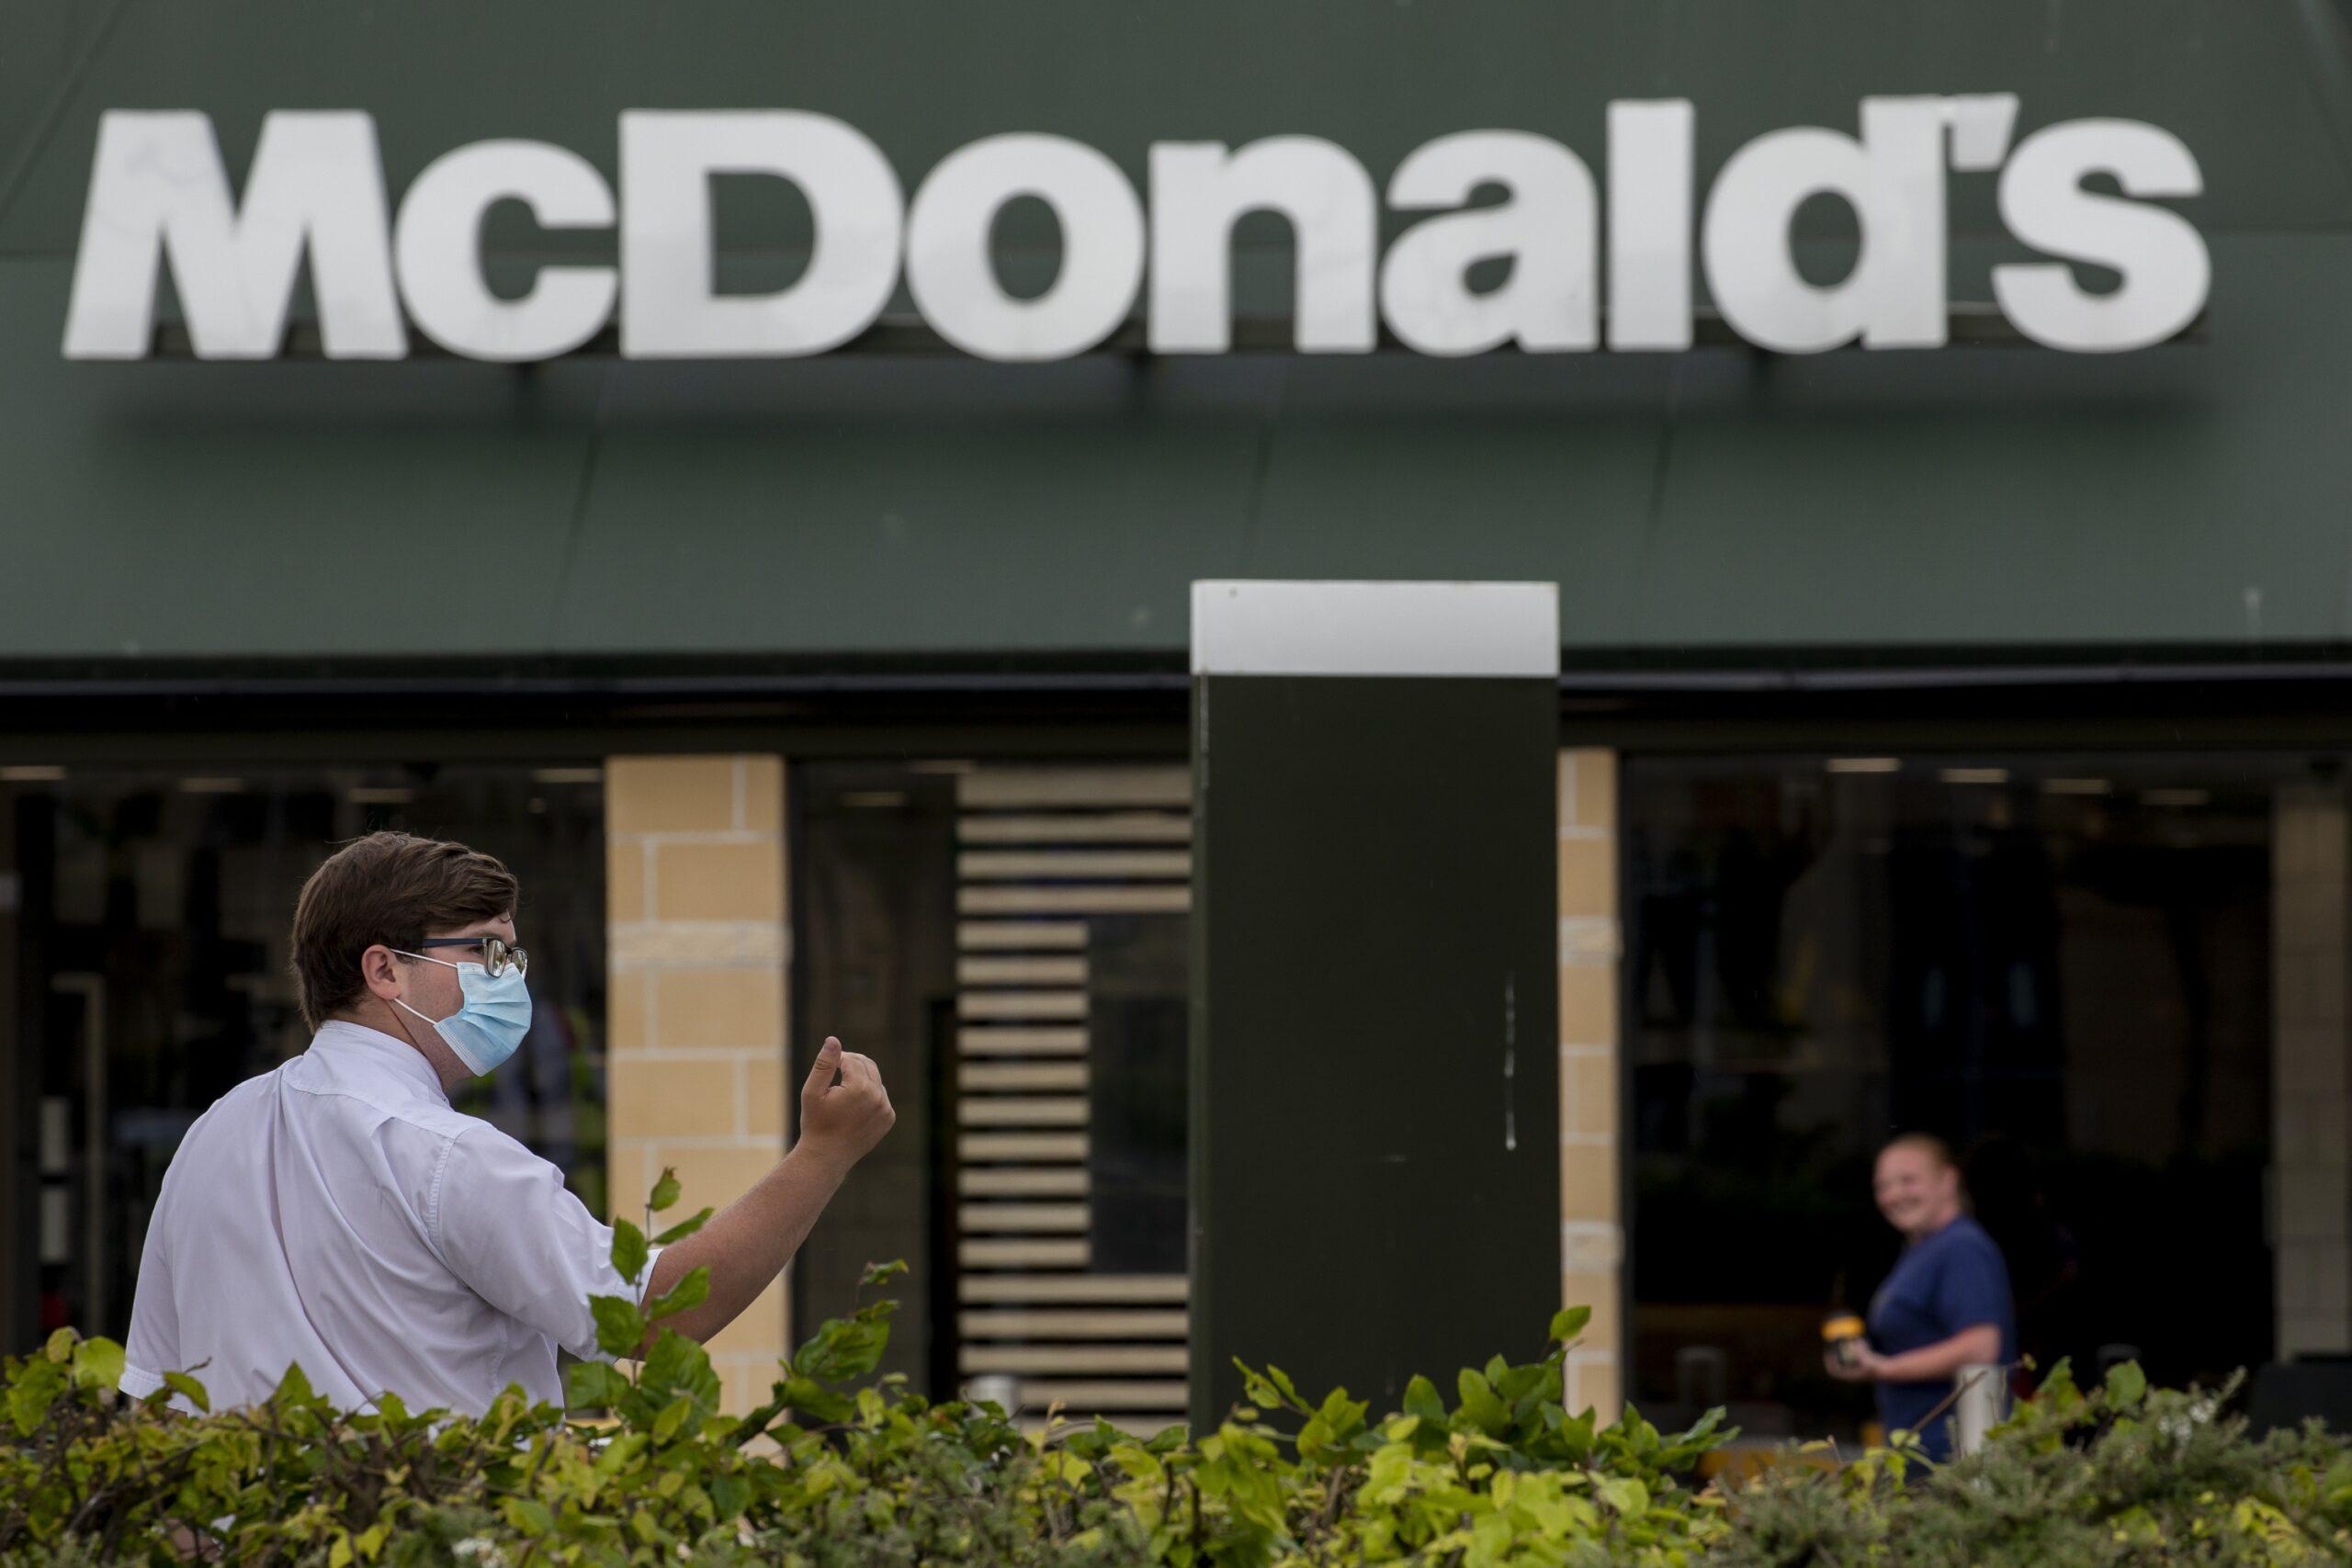 McDonalds reopens in Dunfermline